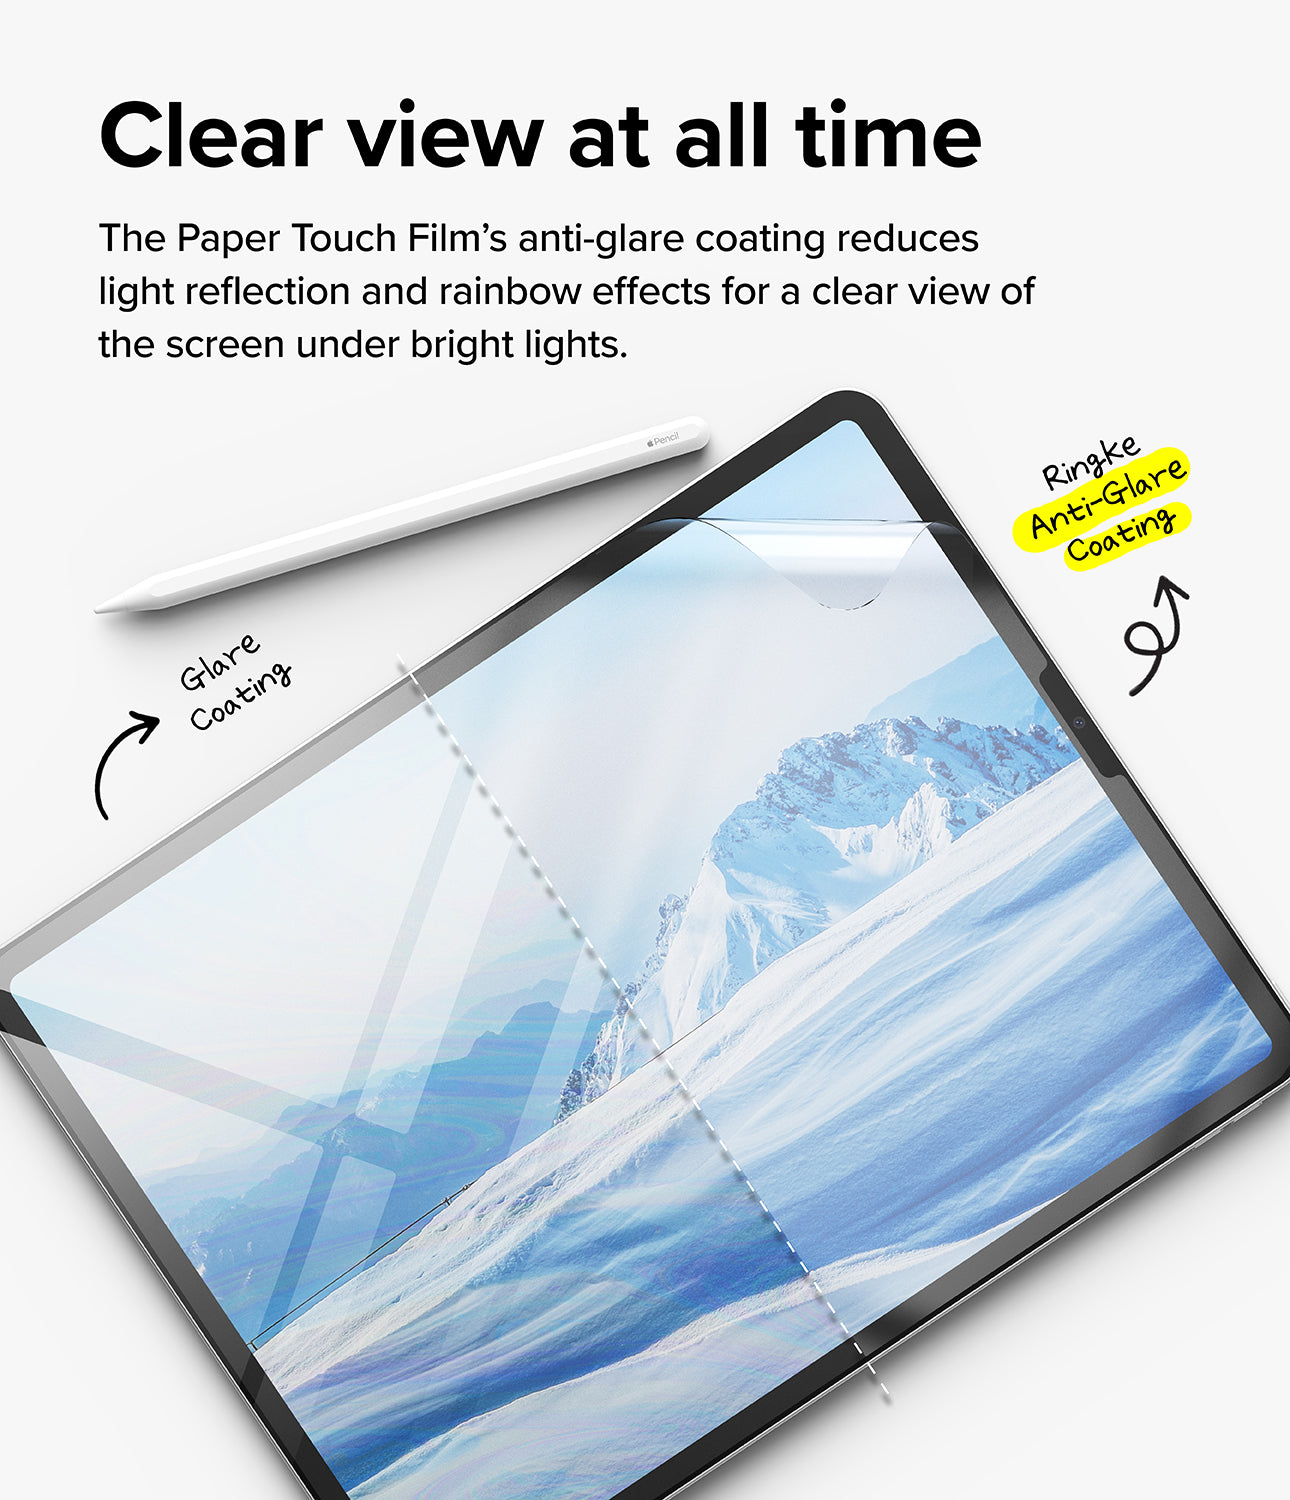 iPad Pro 11" (M4) Screen Protector | Paper Touch Film - Clear view at all time. The Paper Touch Film's anti-glare coating reduces light reflection and rainbow effects for a clear view of the screen under bright lights.